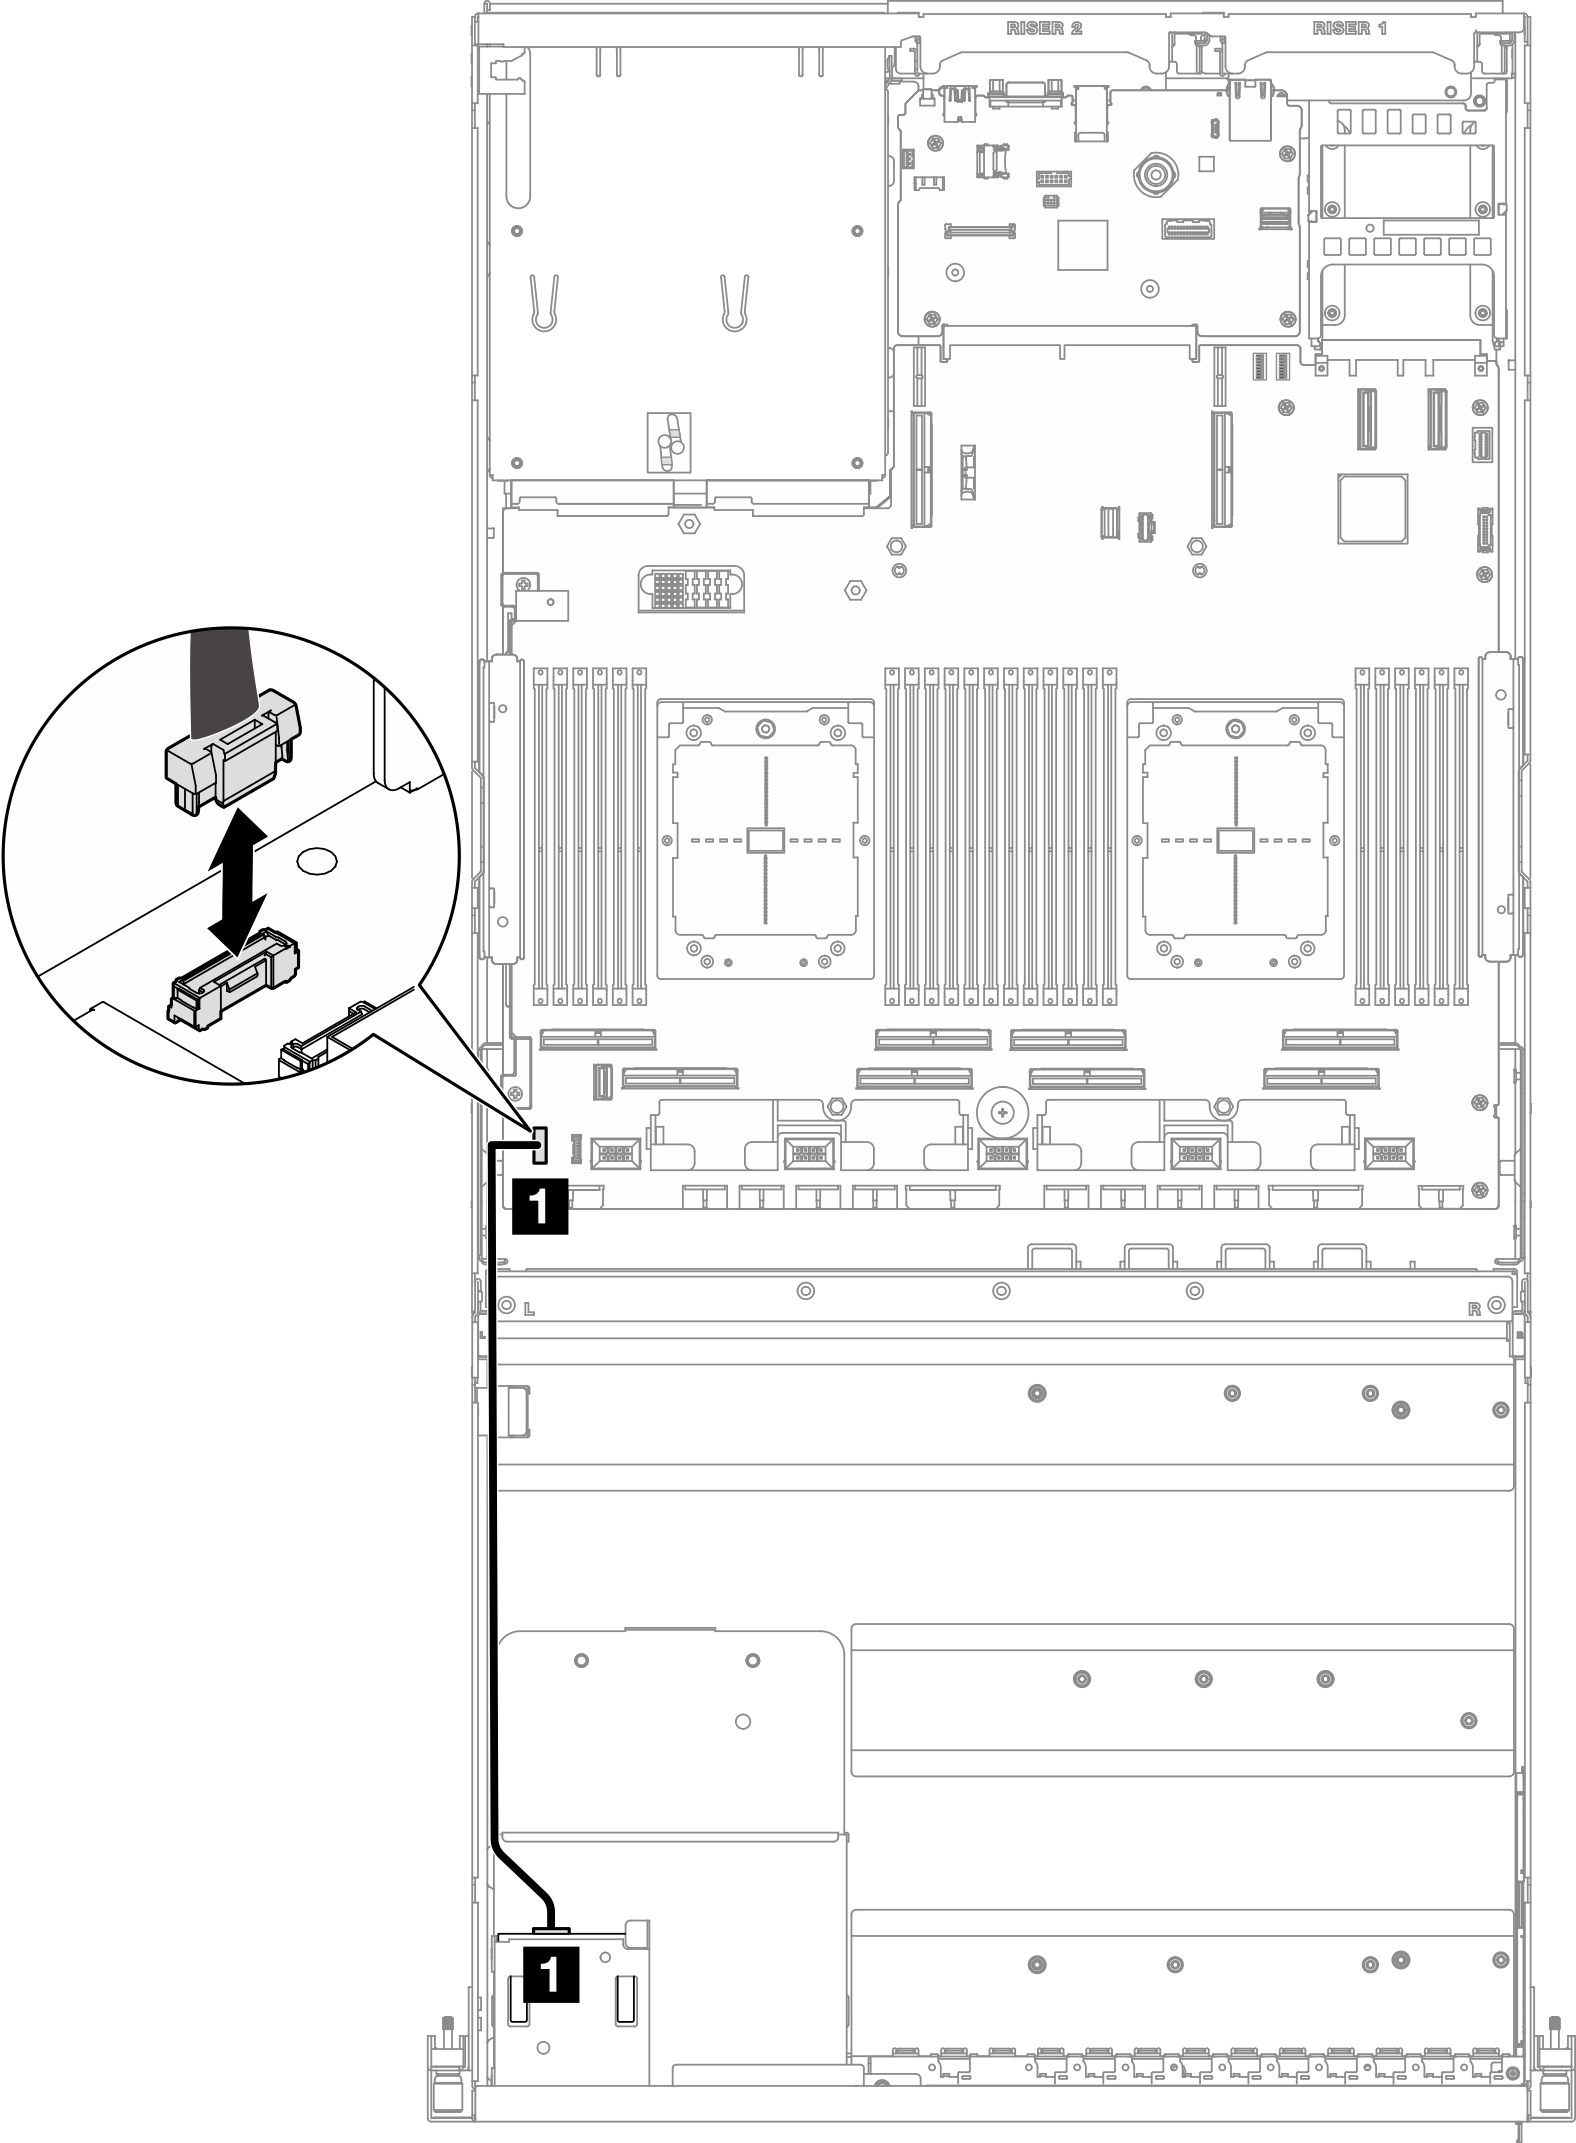 Front operator panel cable disconnection — 4-DW GPU Model and 8-DW GPU Model